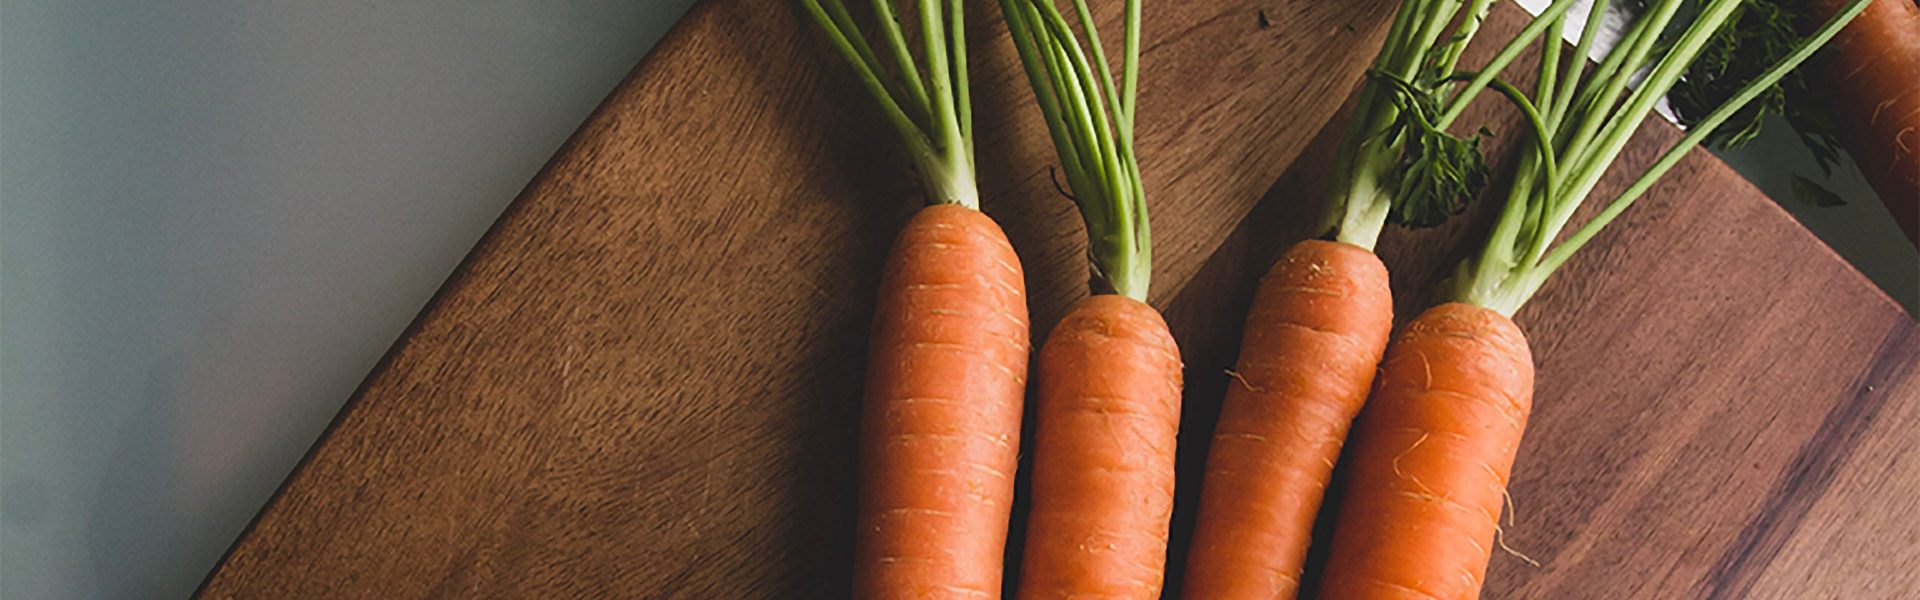 Know Your Food: Carrot